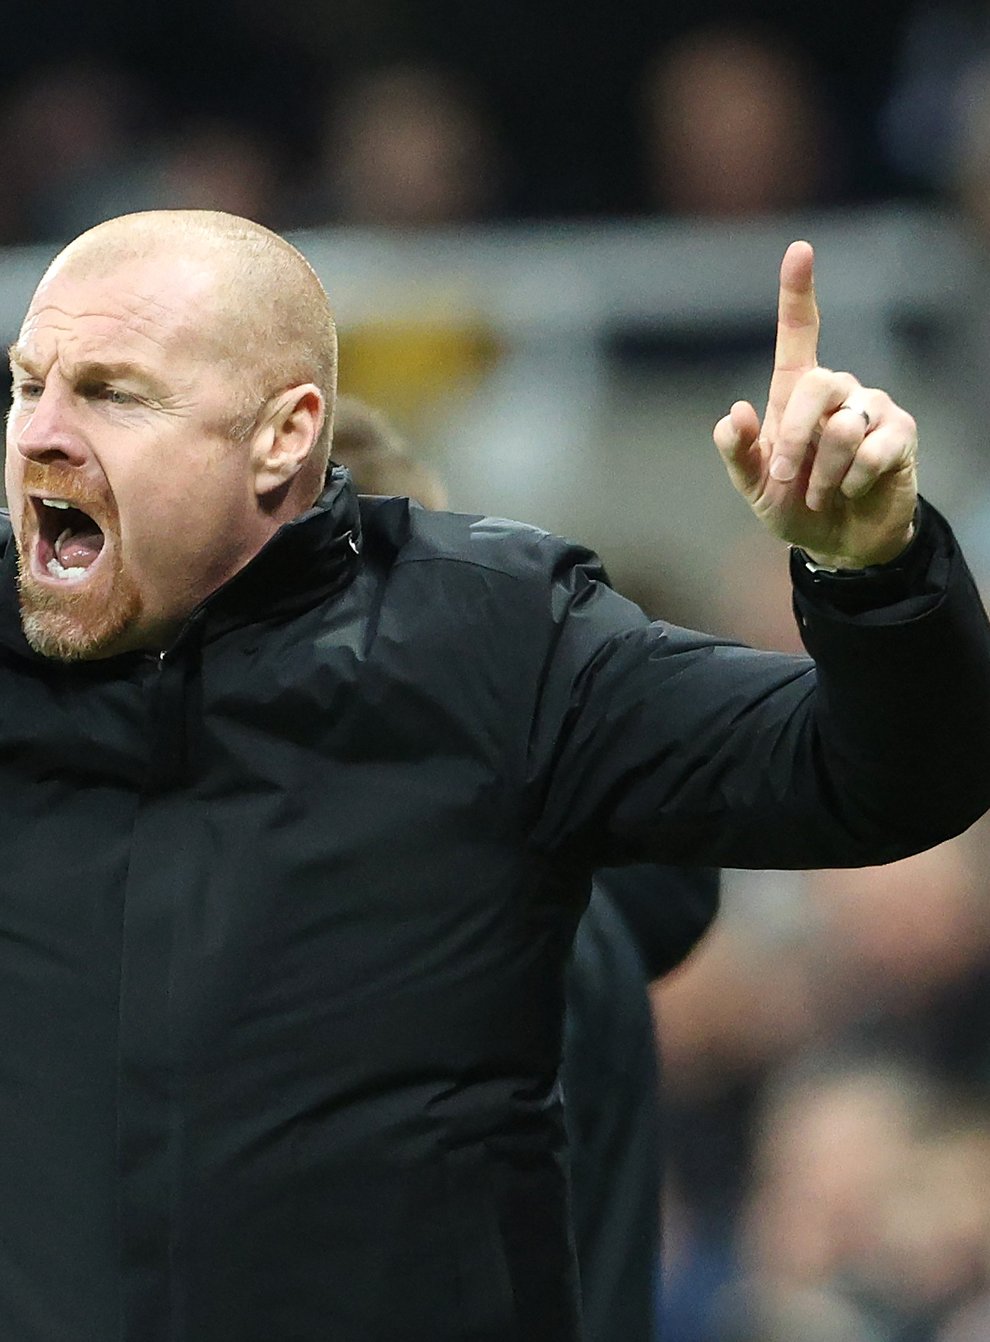 Sean Dyche’s Burnley are bidding for back-to-back wins for the first time this season (Richard Sellers/PA)